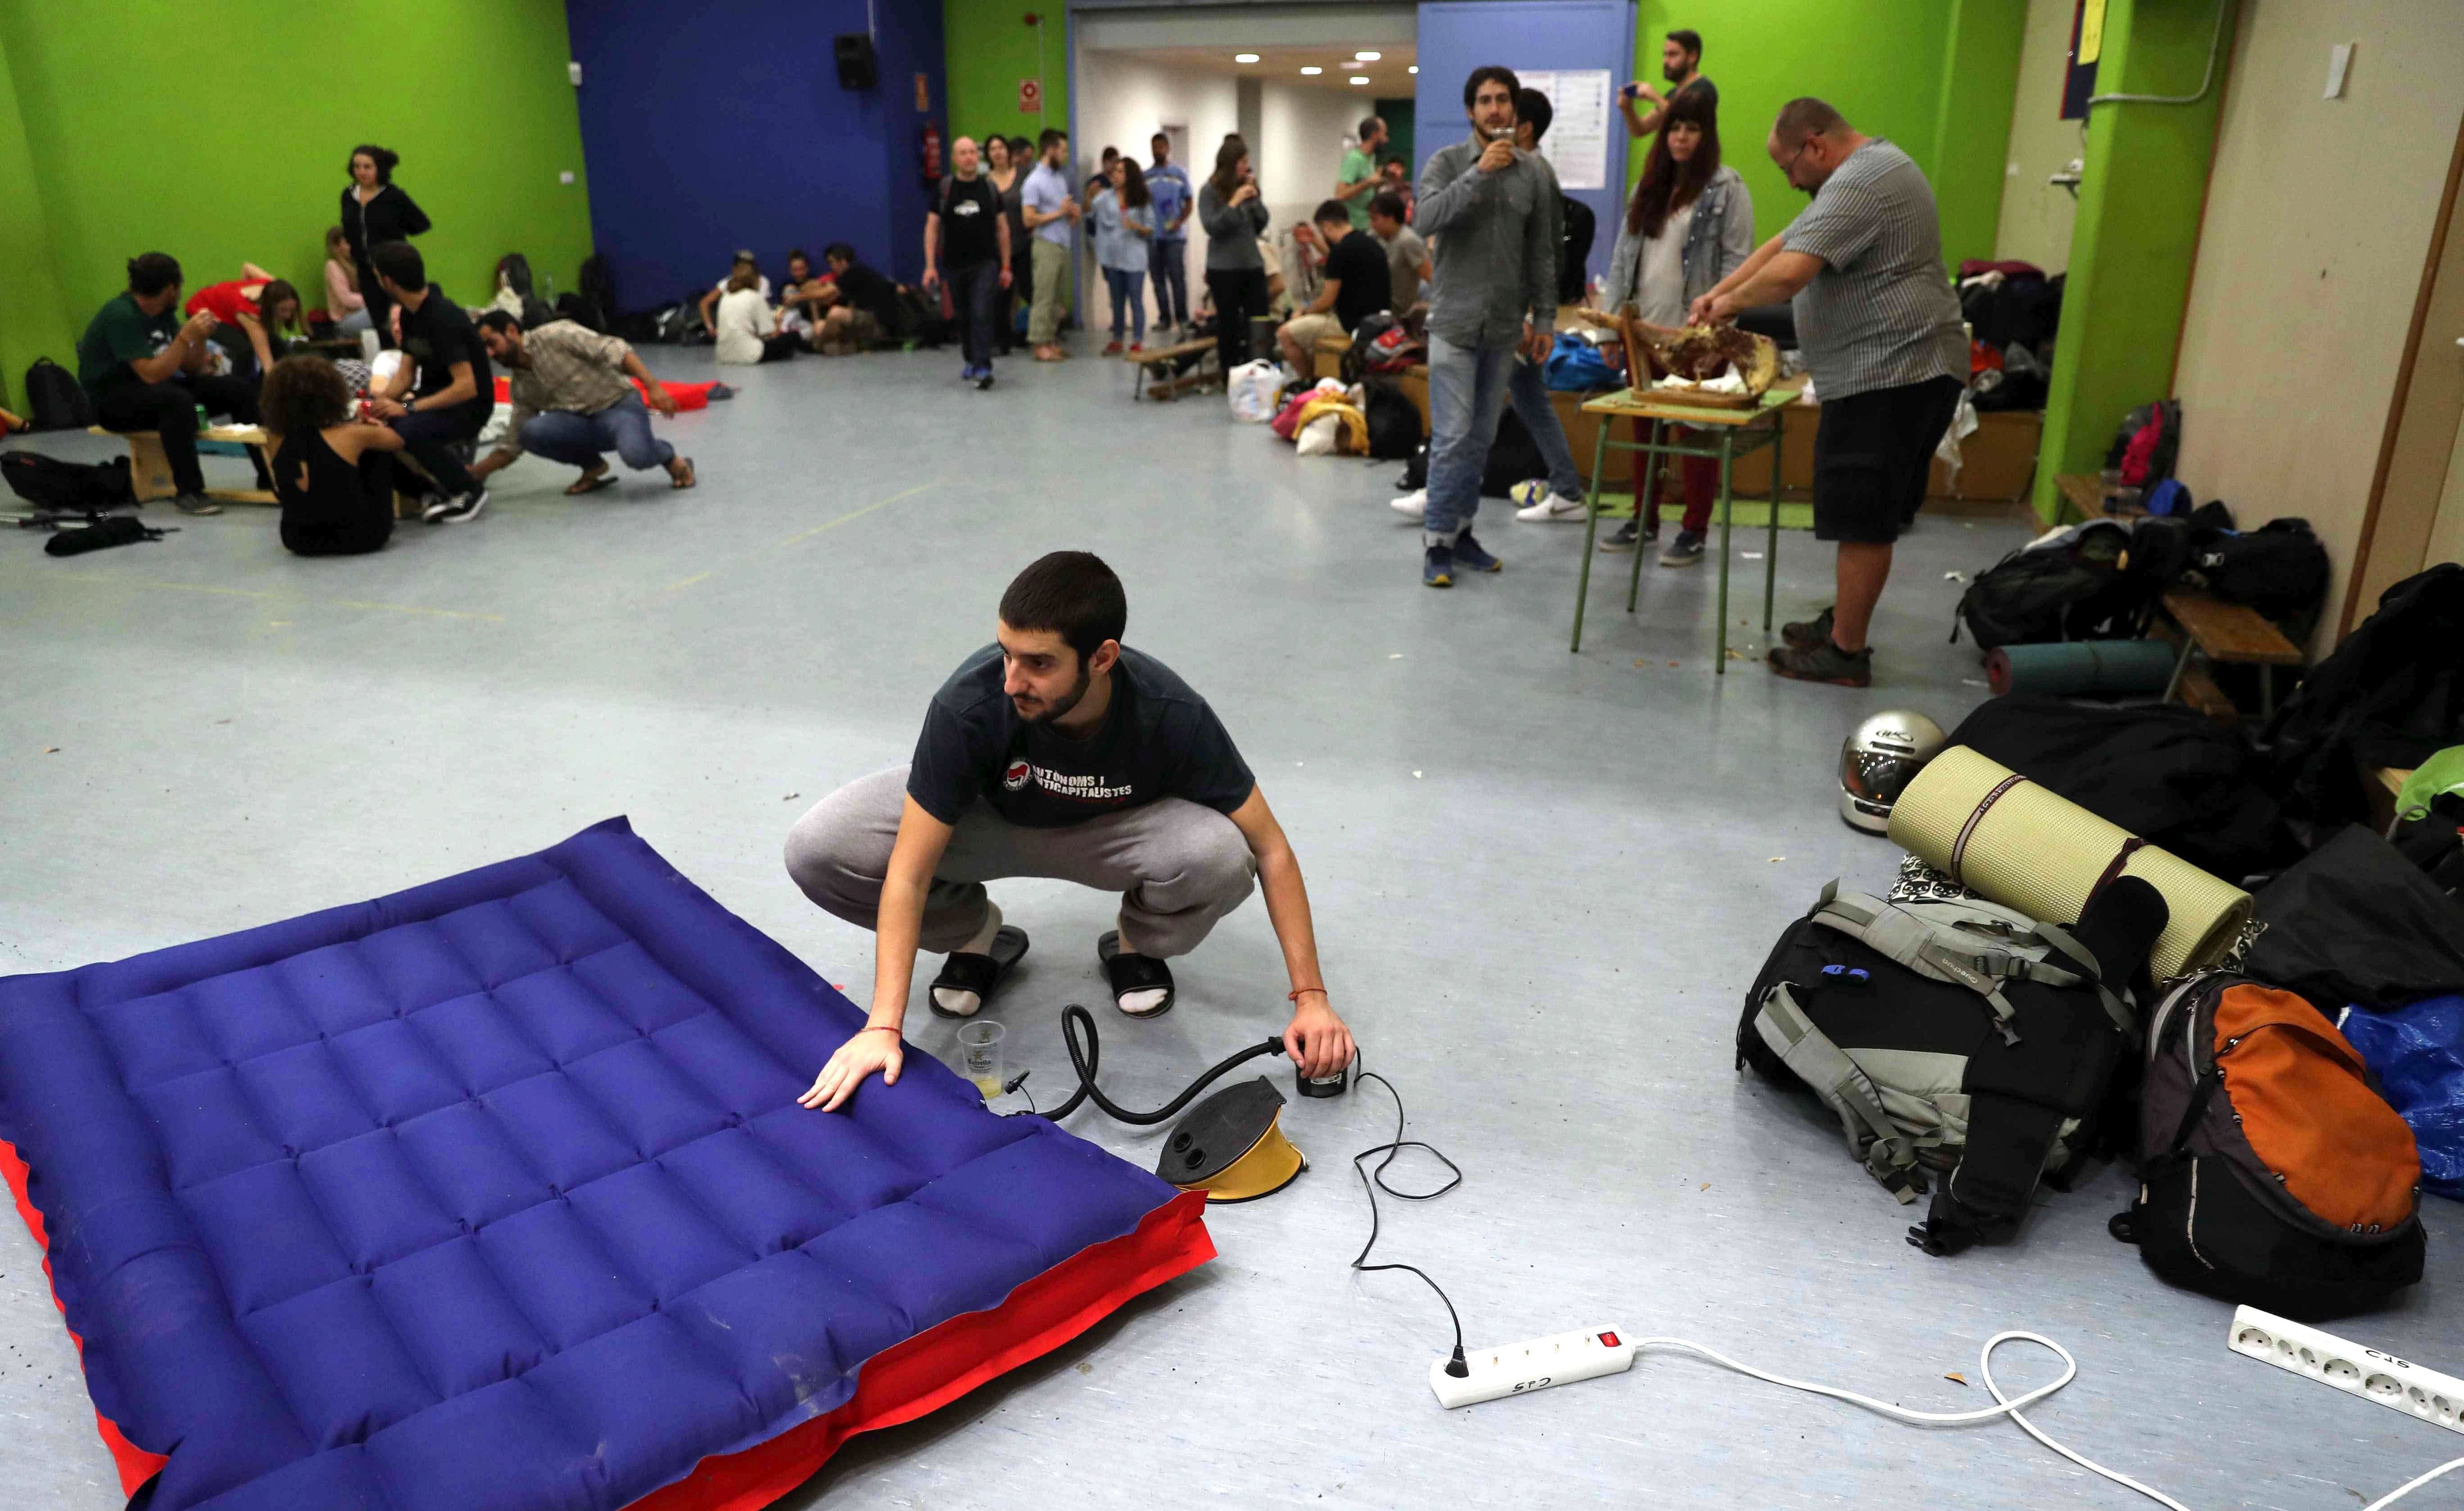 epa06235660 A Catalan pro-independence man prepares an air mattress to spend the night inside the Jaume I school in Barcelona, northeastern Spain, early 30 September 2017. Hundreds of people have spent the night in different schools and civic centers designated by the regional Government to be polling stations for the '1-O Referendum' in an attempt to prevent the police from avoid their use, as the Superior Court of Justice of Catalonia ordered. Catalonian Government has planned a total of 2,315 polling stations and 6,249 officials in charge of them in all the region, as well as some 7,235 people in charge of securing the chances to vote to some 5,343.358 Catalans. Until the date, the Catalan police (Mossos d'Esquadra) has checked some 1,300 polling stations, of which 163 have been occupied at the moment, meaning a 12 per cent of the total number.  EPA/Toni Albir